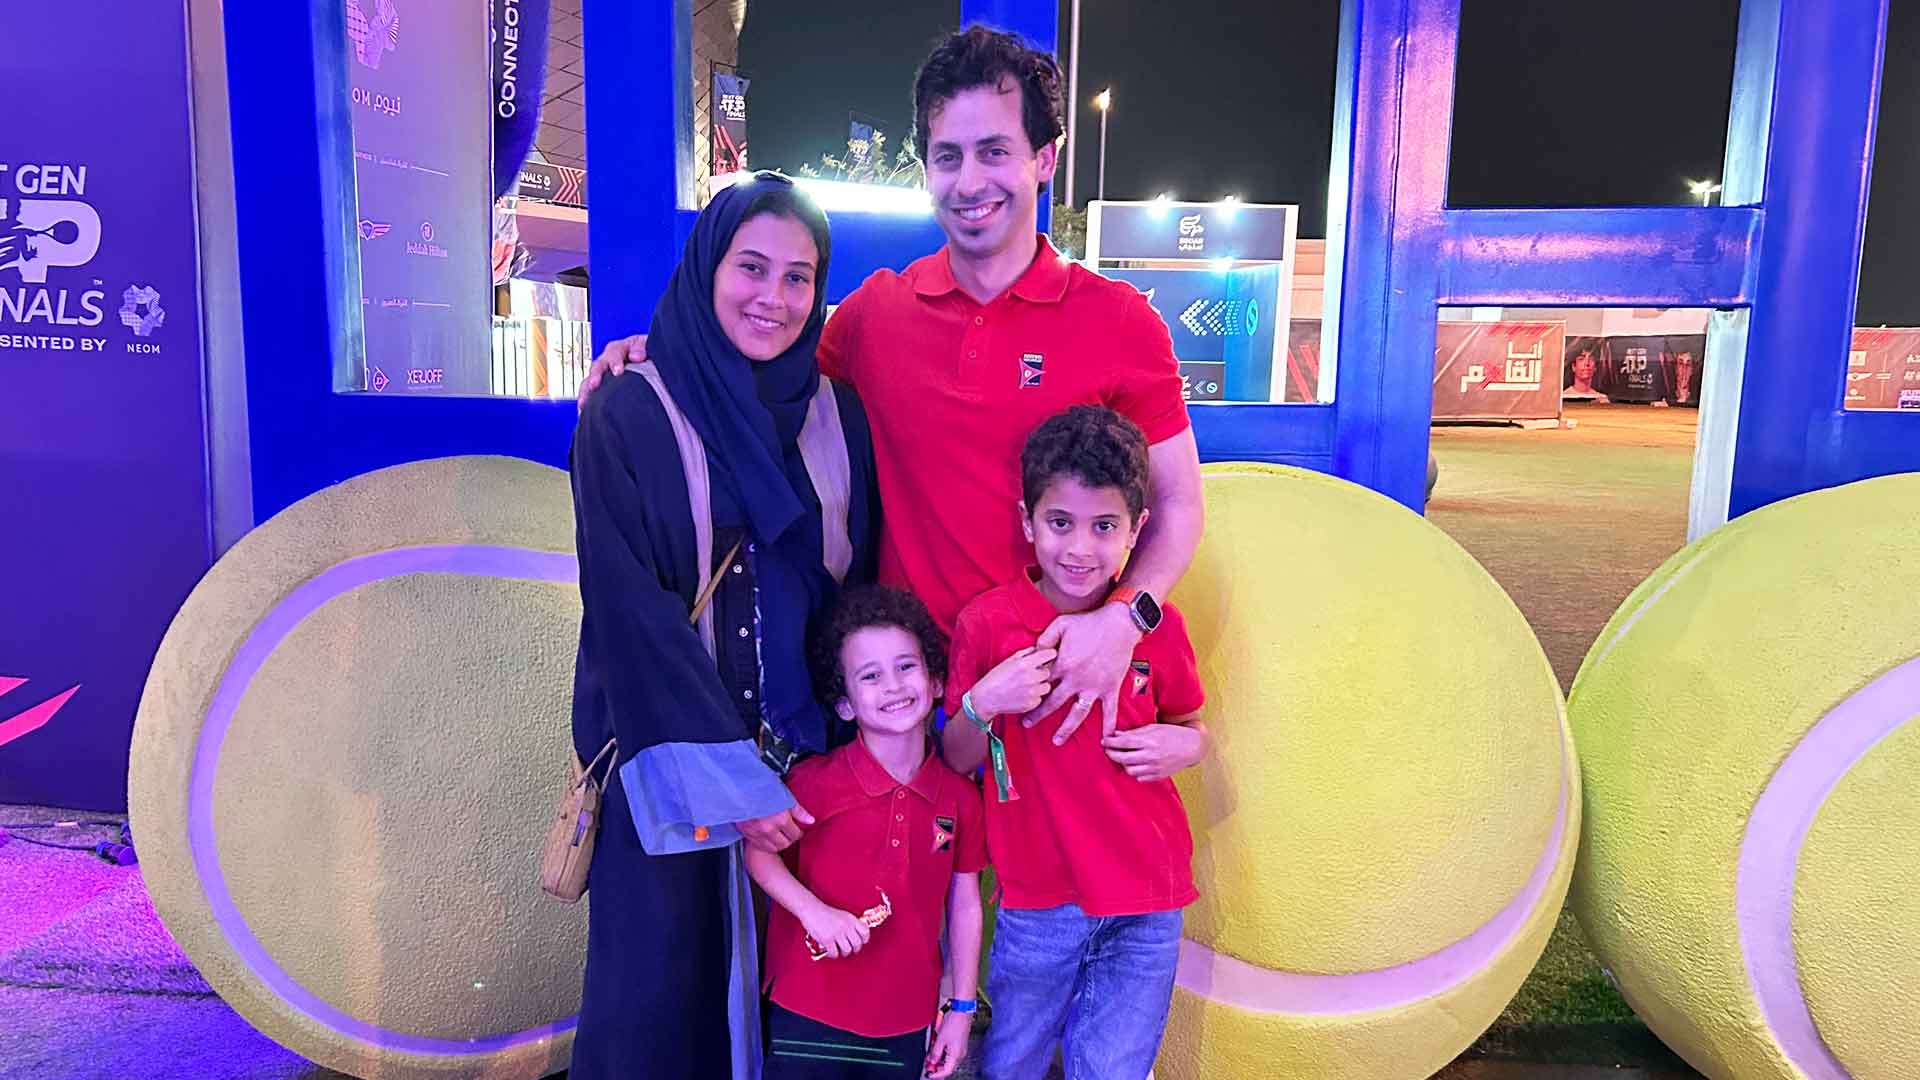 Jeddah tennis fan Ahmed Aljefri with his family at the Next Gen ATP Finals in Saudi Arabia.